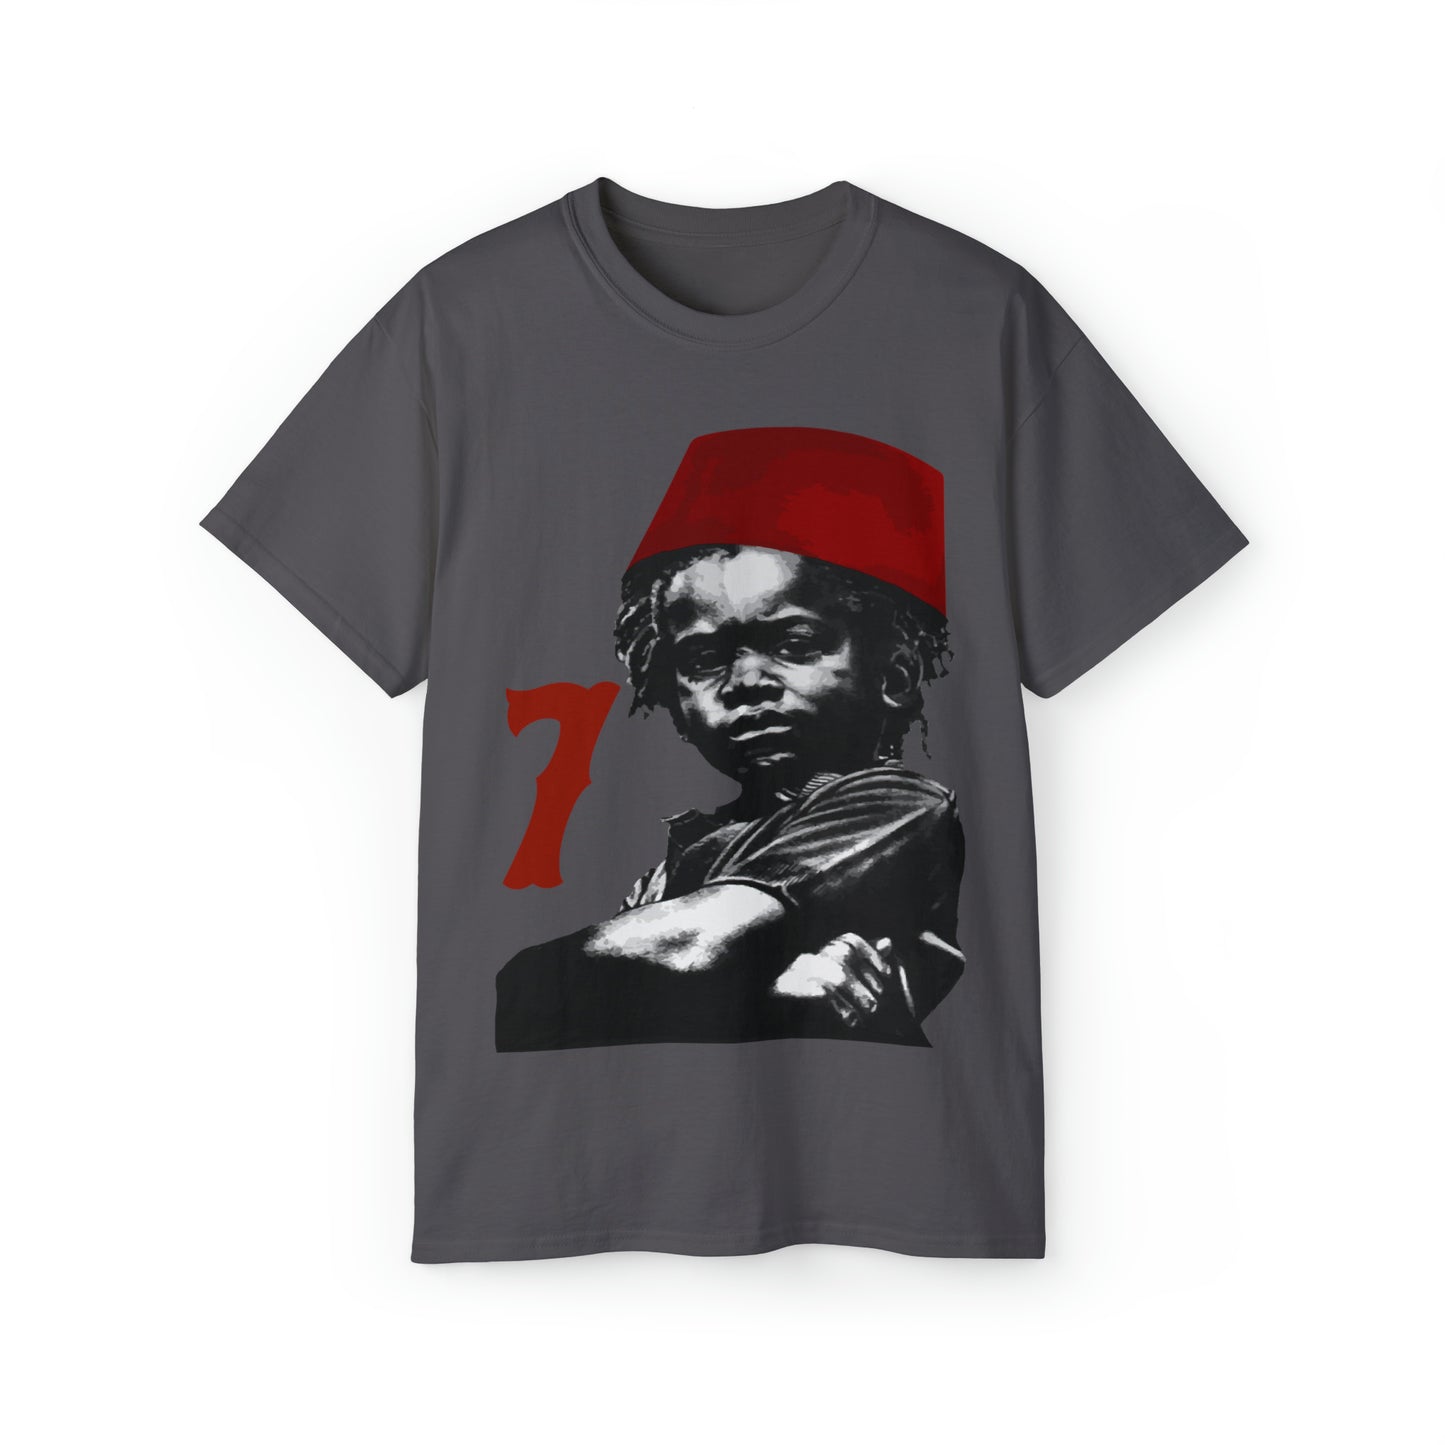 Seven and Child Tee